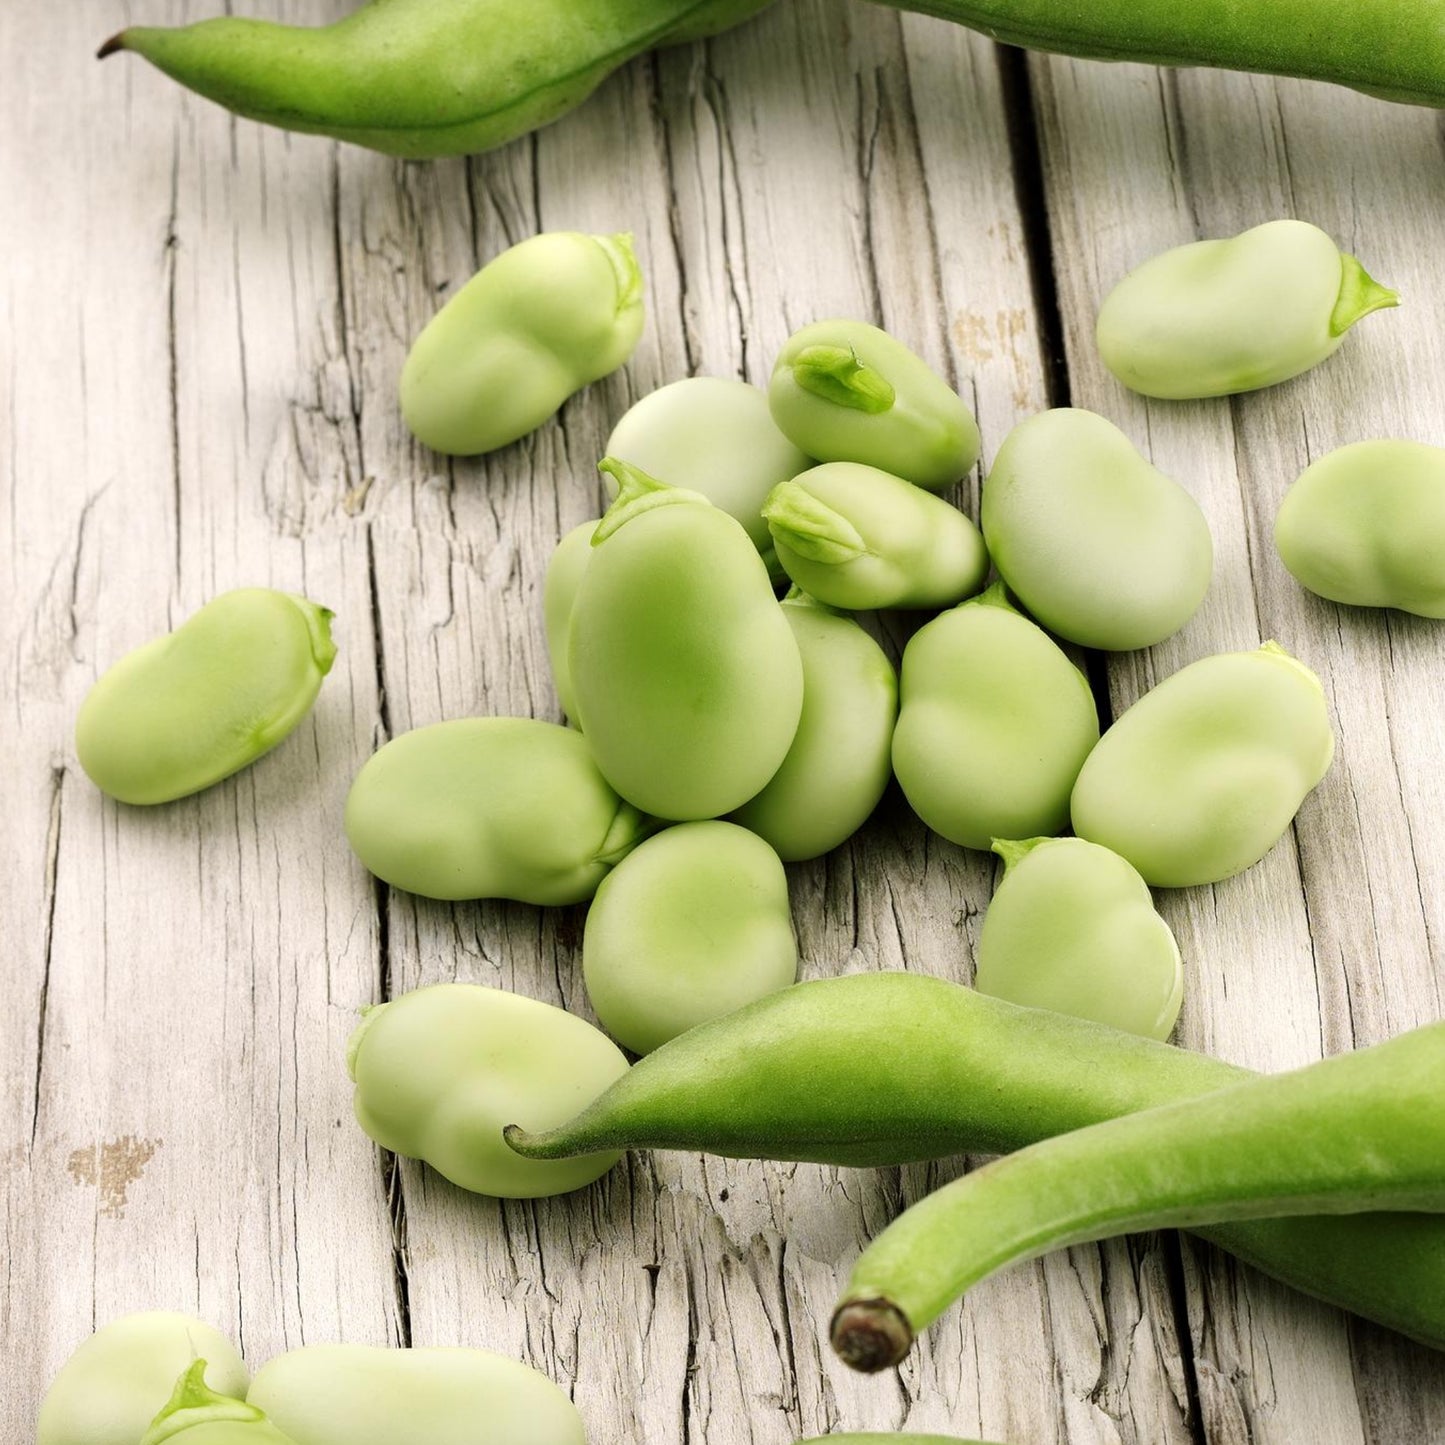 Lima Beans - Seeds - Non Gmo - Heirloom Seeds – Bean Seeds - Grow Your Own Food At Home! - Fast Growing Variety!